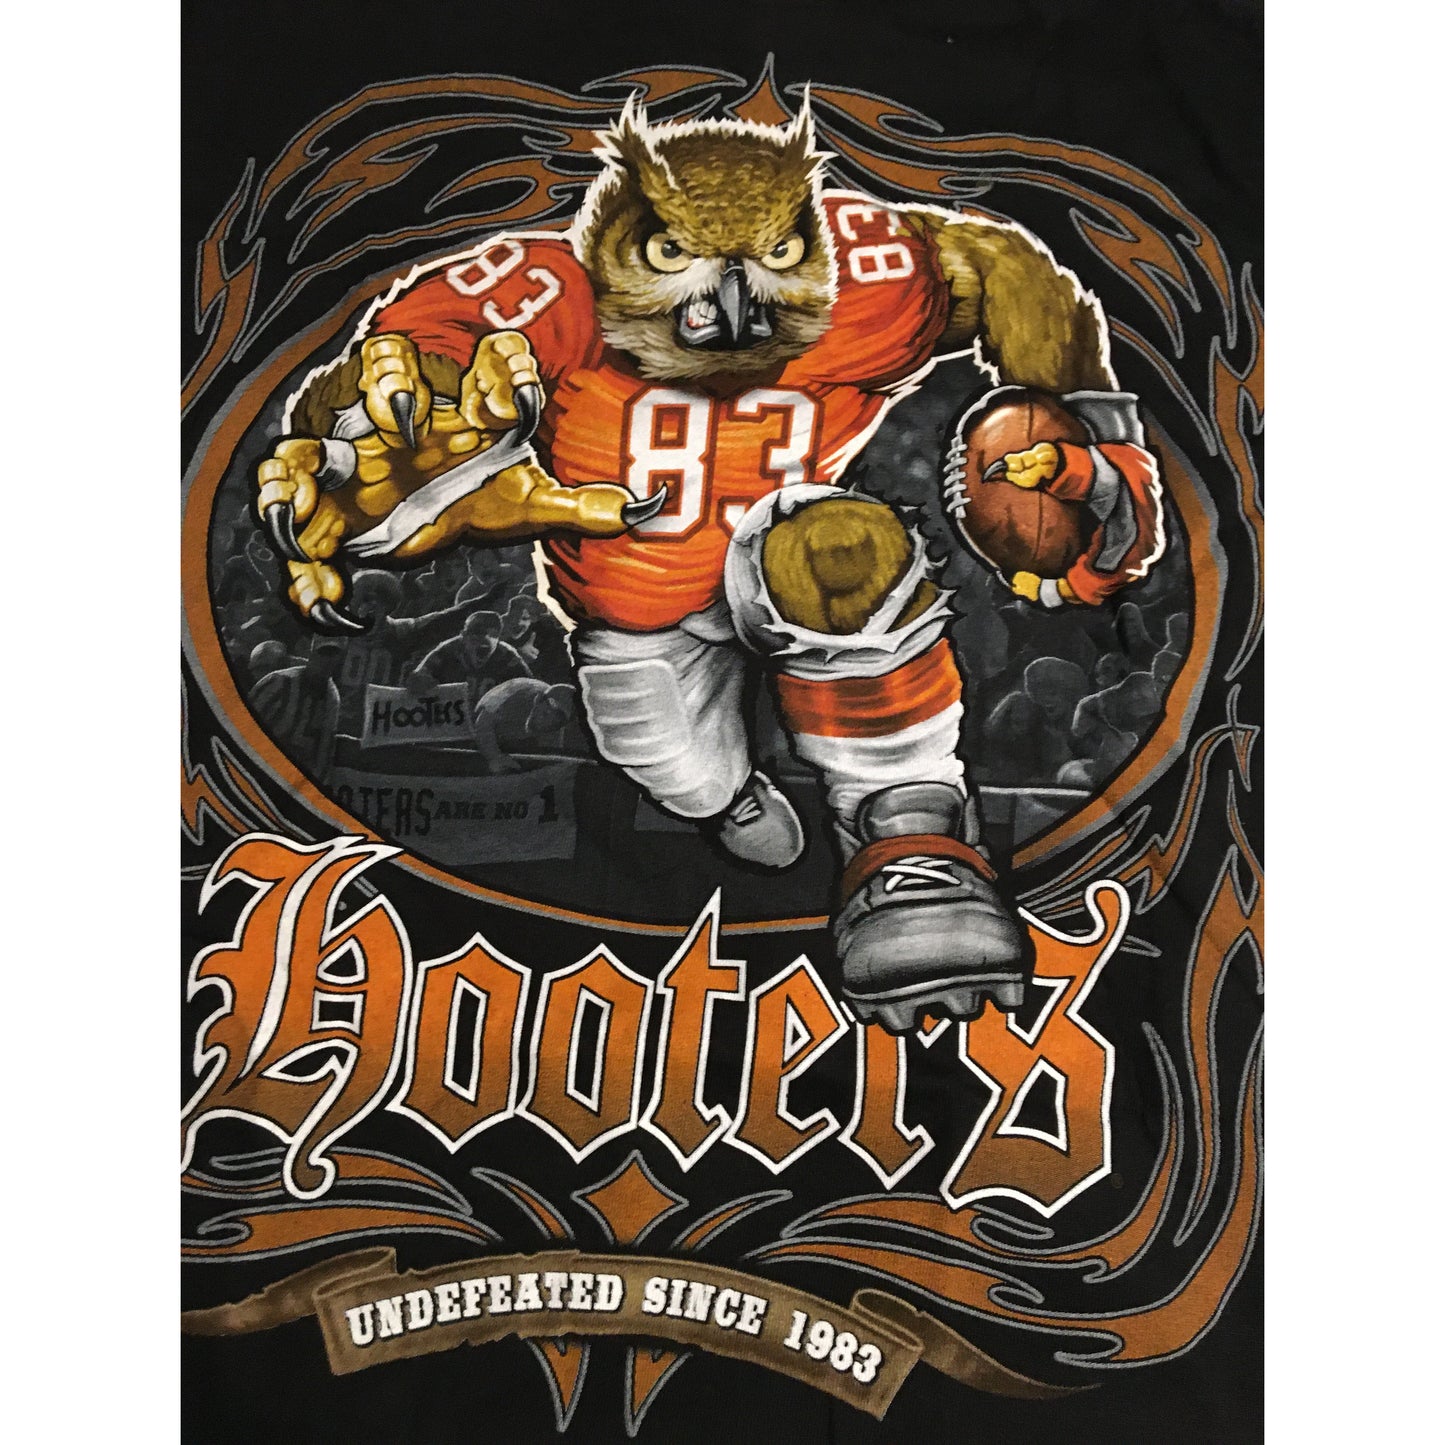 Hooters Men's "Undefeated Since 1983" Running Back T-shirt